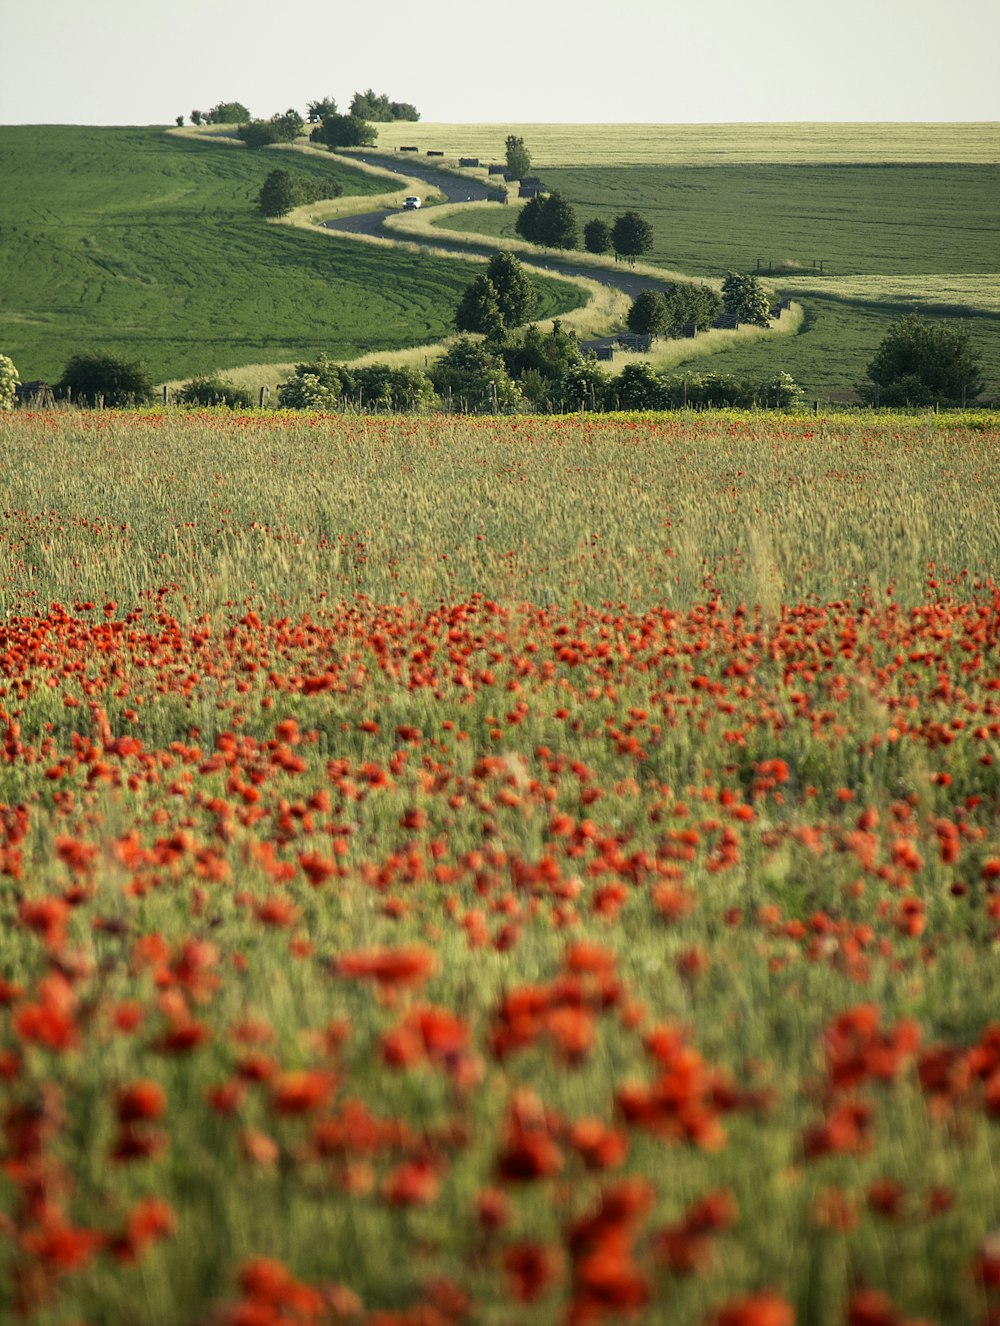 a field full of red flowers with a winding road in the background